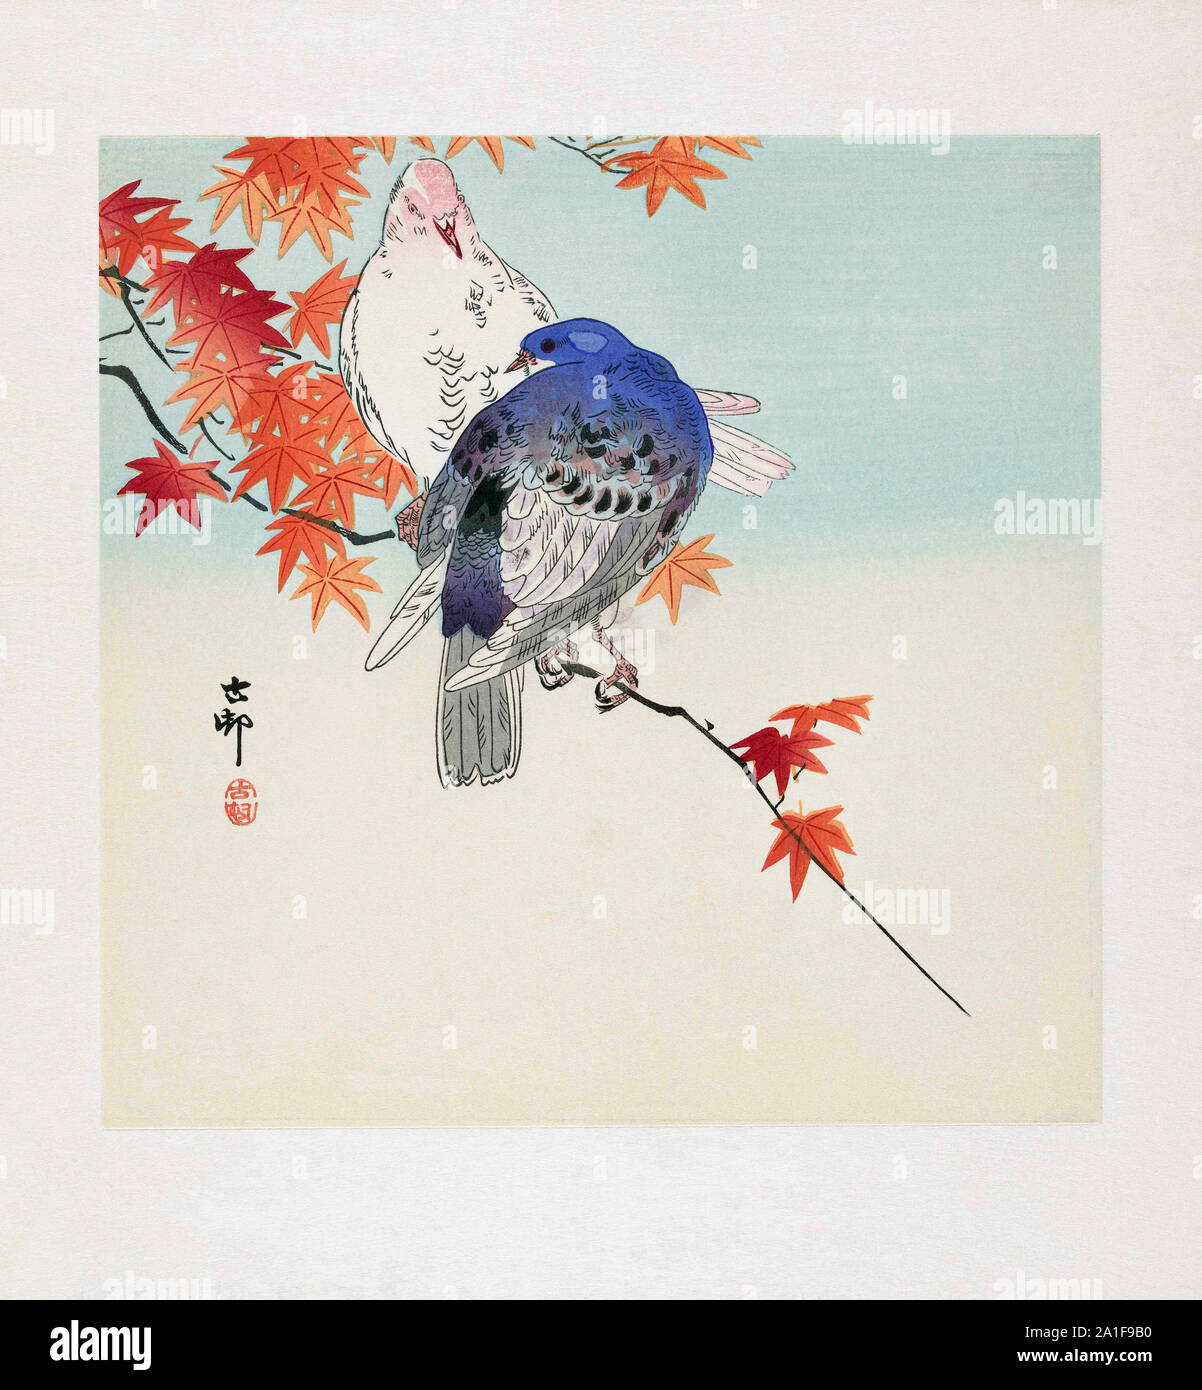 Two Pigeons on a Branch with Autumn Leaves, by Japanese artist Ohara Koson, 1877 - 1945.  Ohara Koson was part of the shin-hanga, or new prints movement. Stock Photo